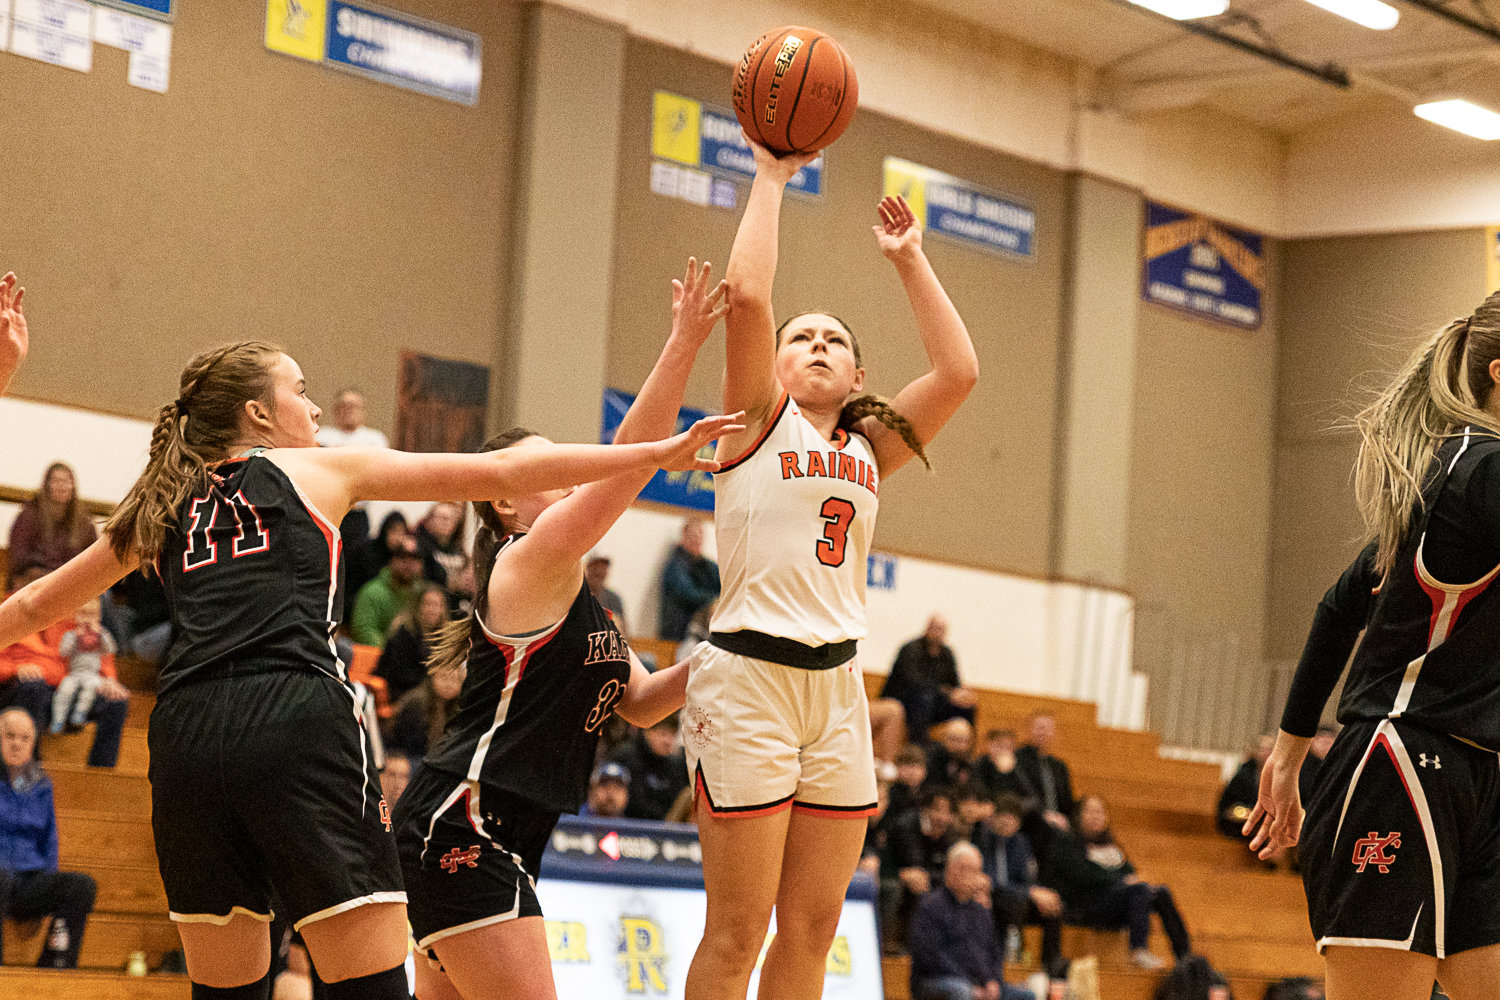 Rainier guard Brooklynn Swenson takes a shot against Kalama in the first round of the 2B District tournament Feb. 4 at Rochester.